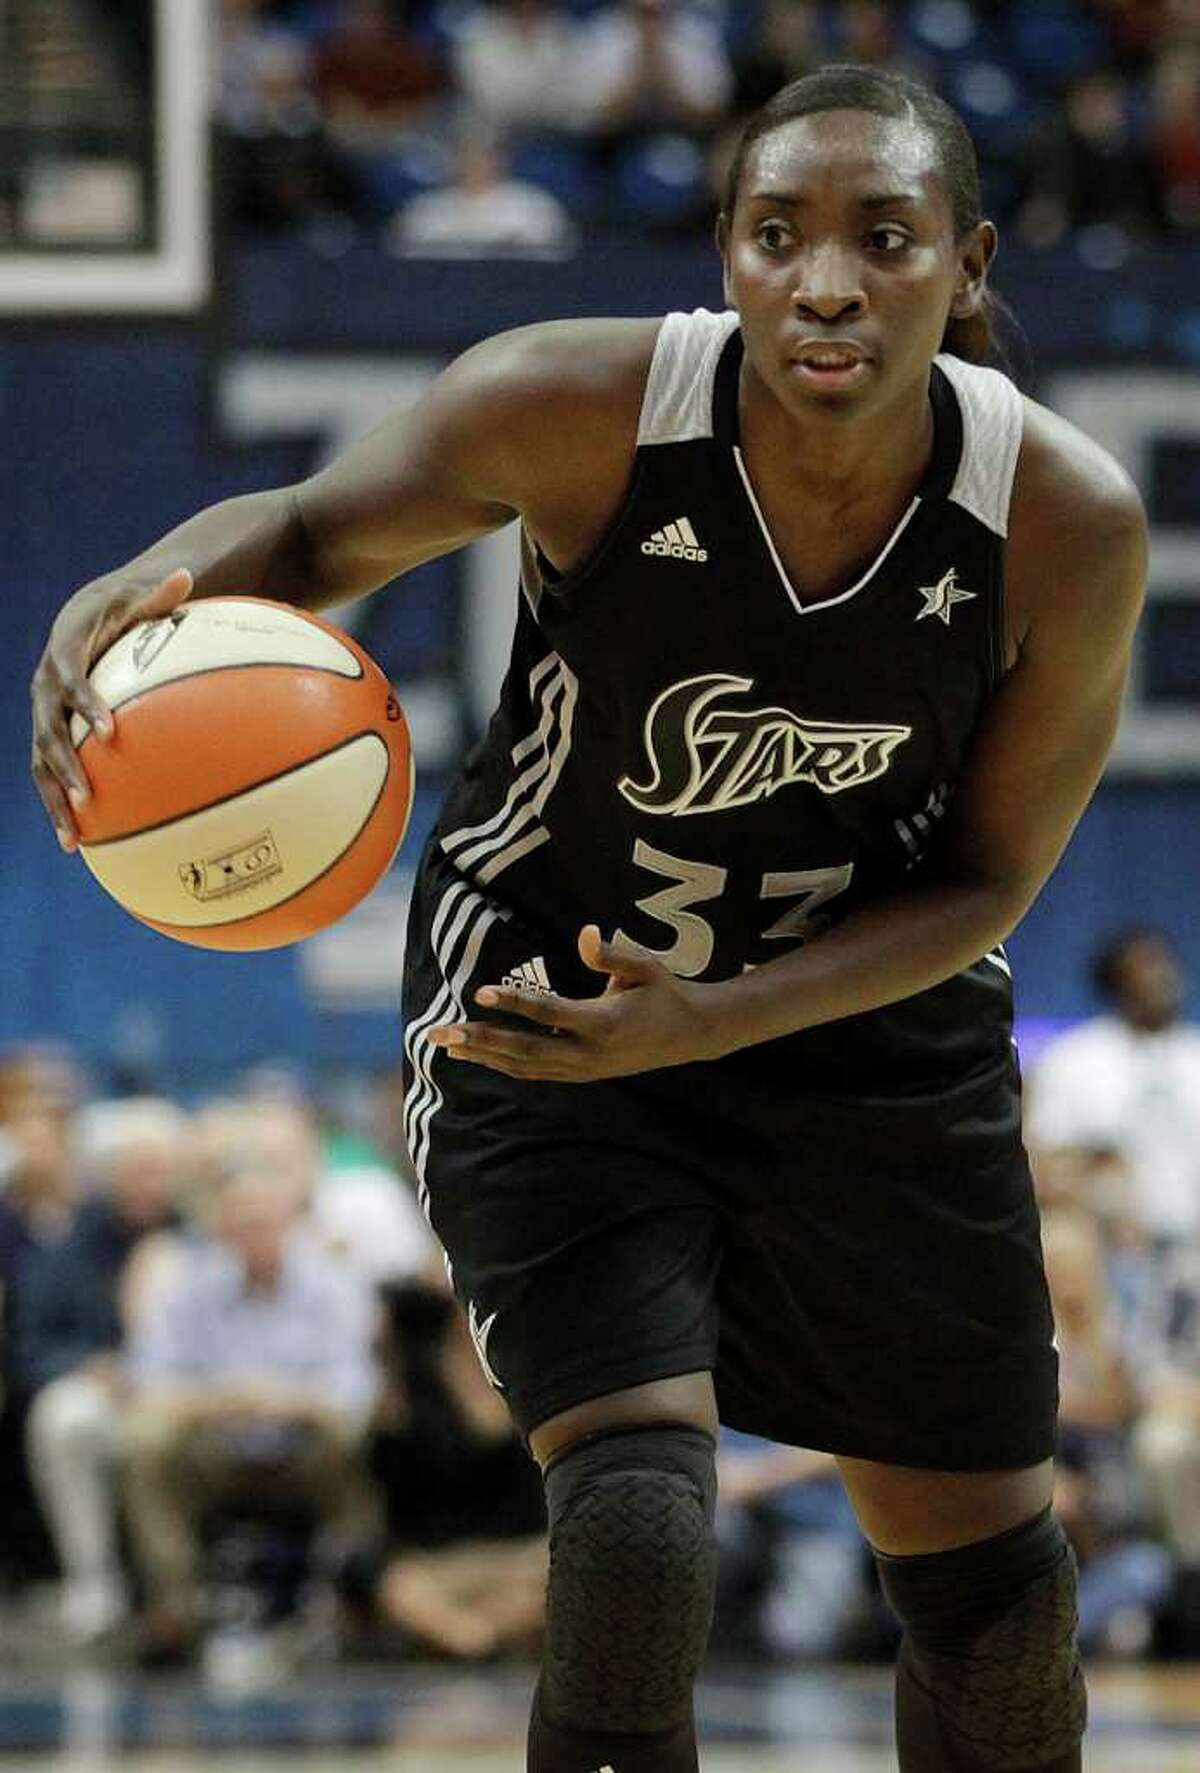 San Antonio Silver Stars forward Sophia Young (33) looks to make a pass against the Minnesota Lynx in the first half of Game 3 of a first-round WNBA playoff basketball series, Tuesday, Sept. 20, 2011, in Minneapolis. The Lynx won 85-67.